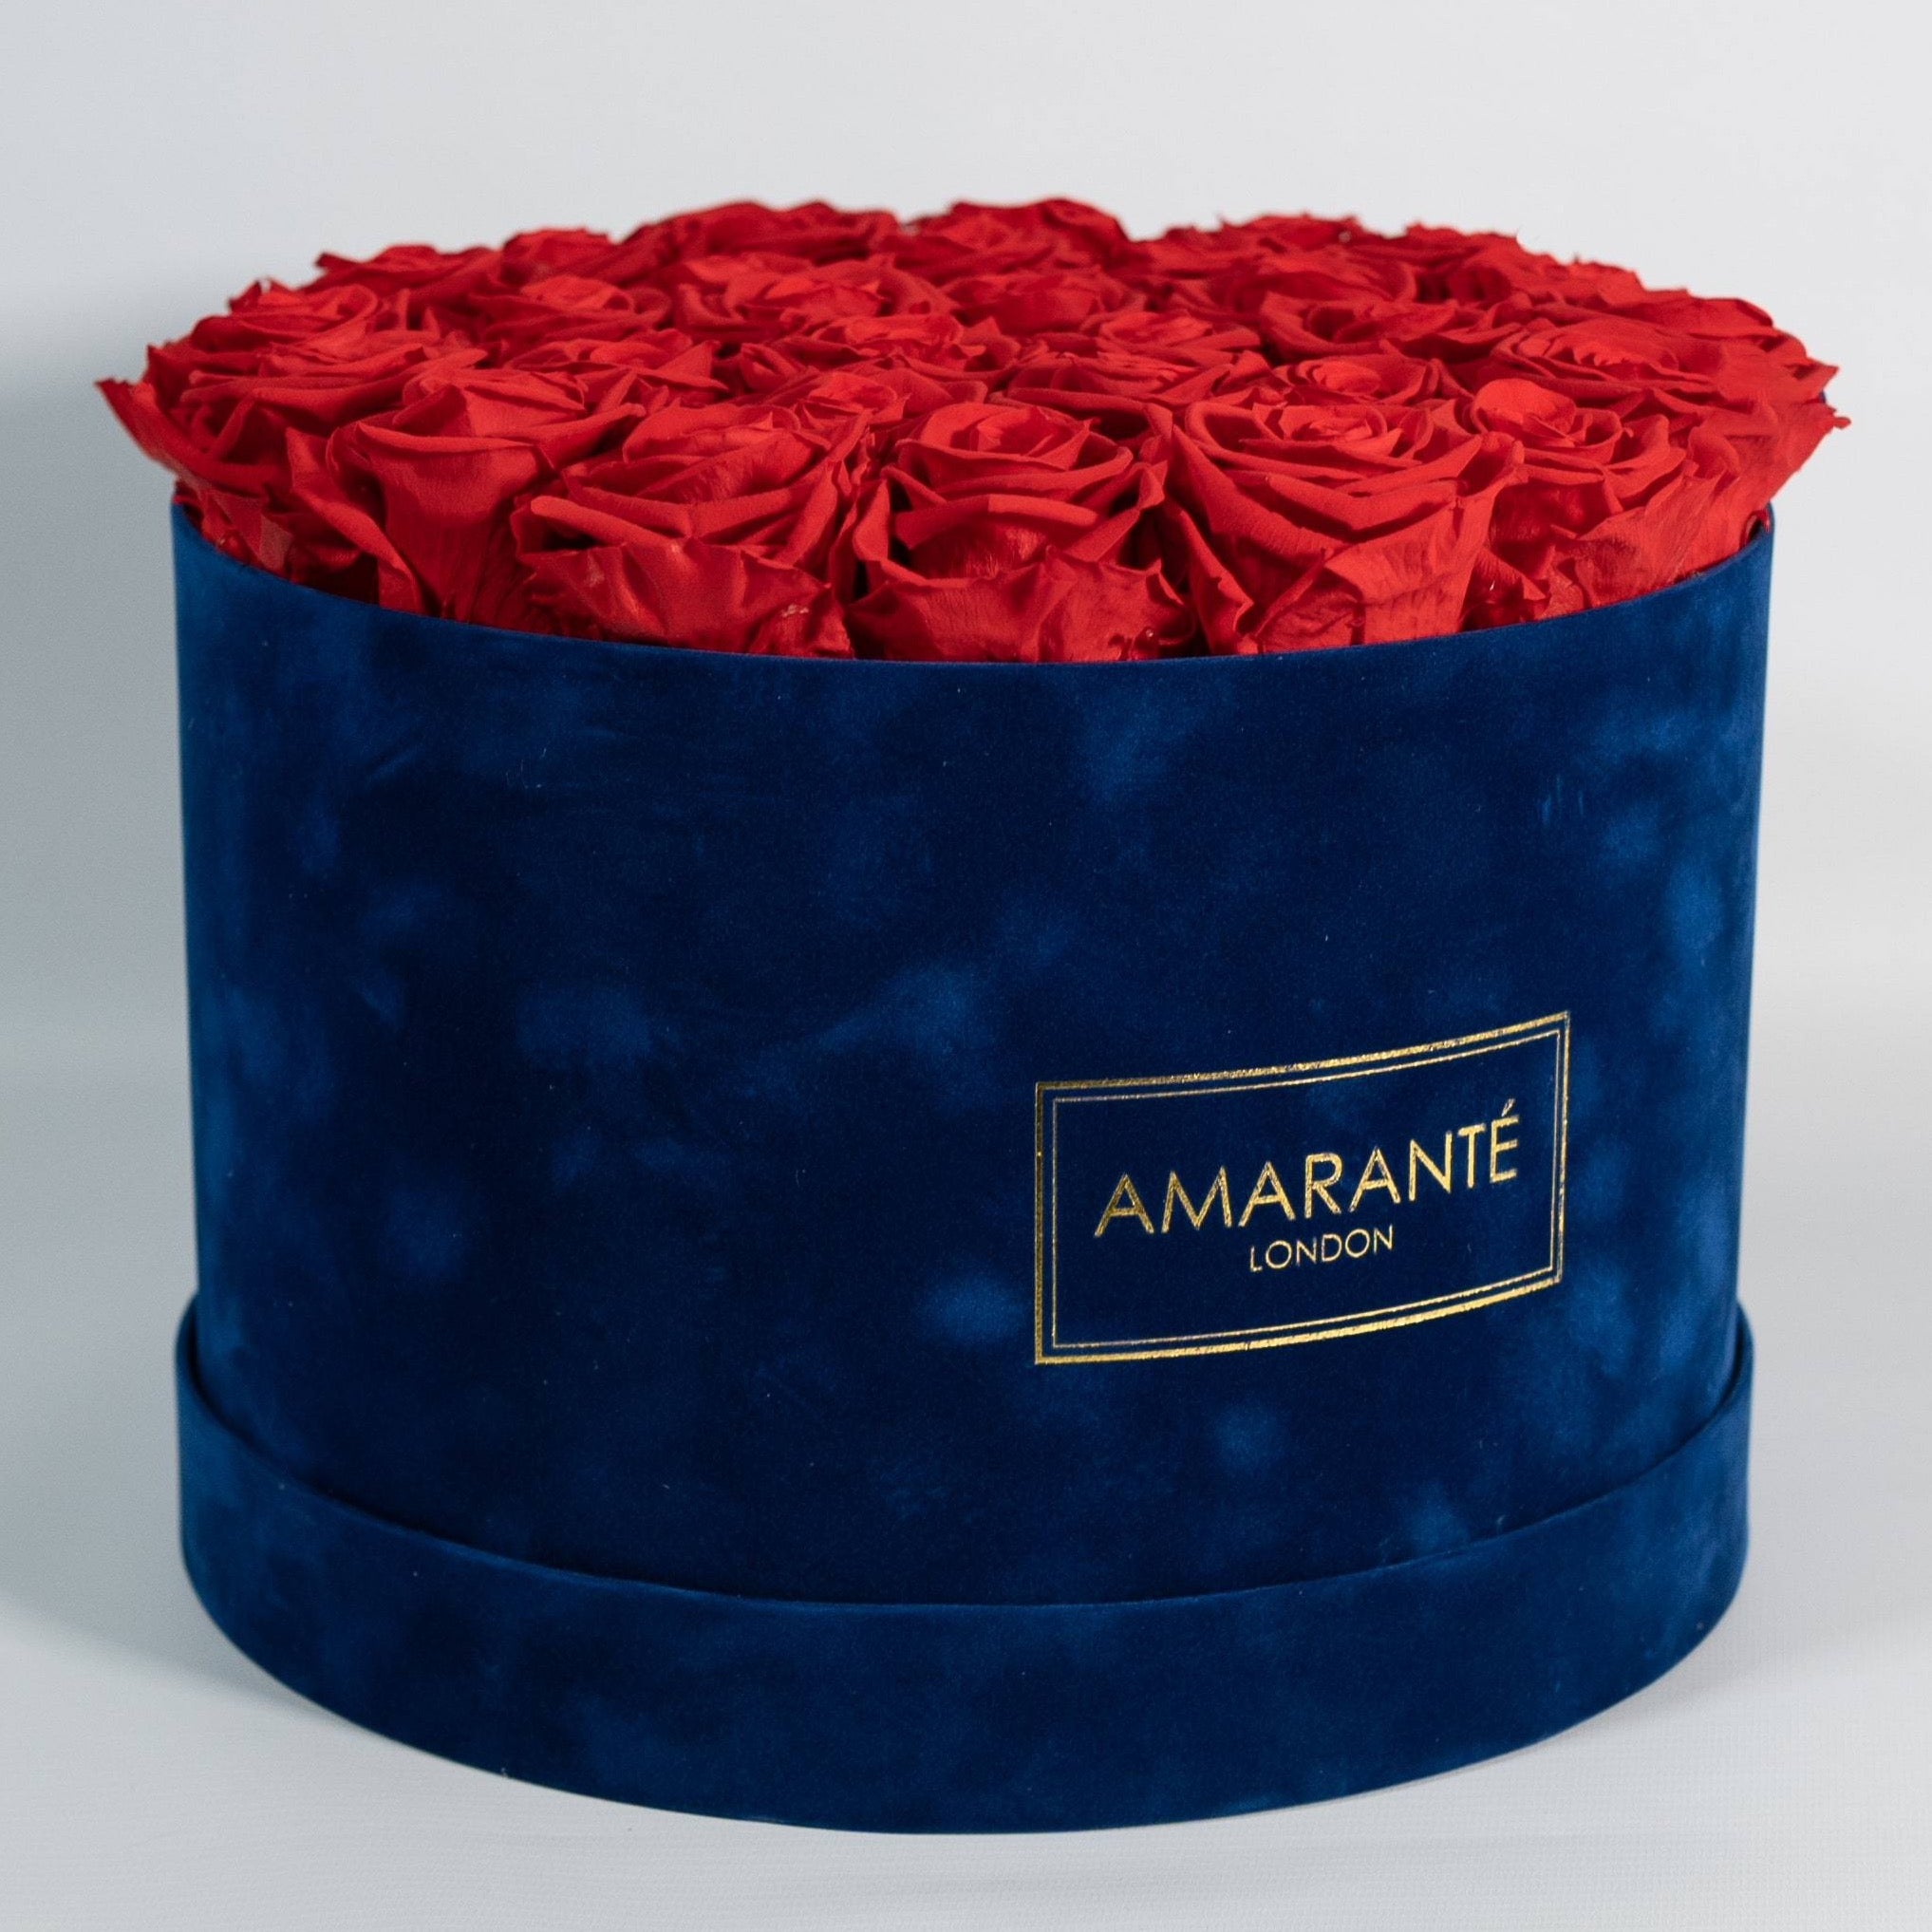 Elegant red Roses shown in a sophisticated extra large blue round box. 